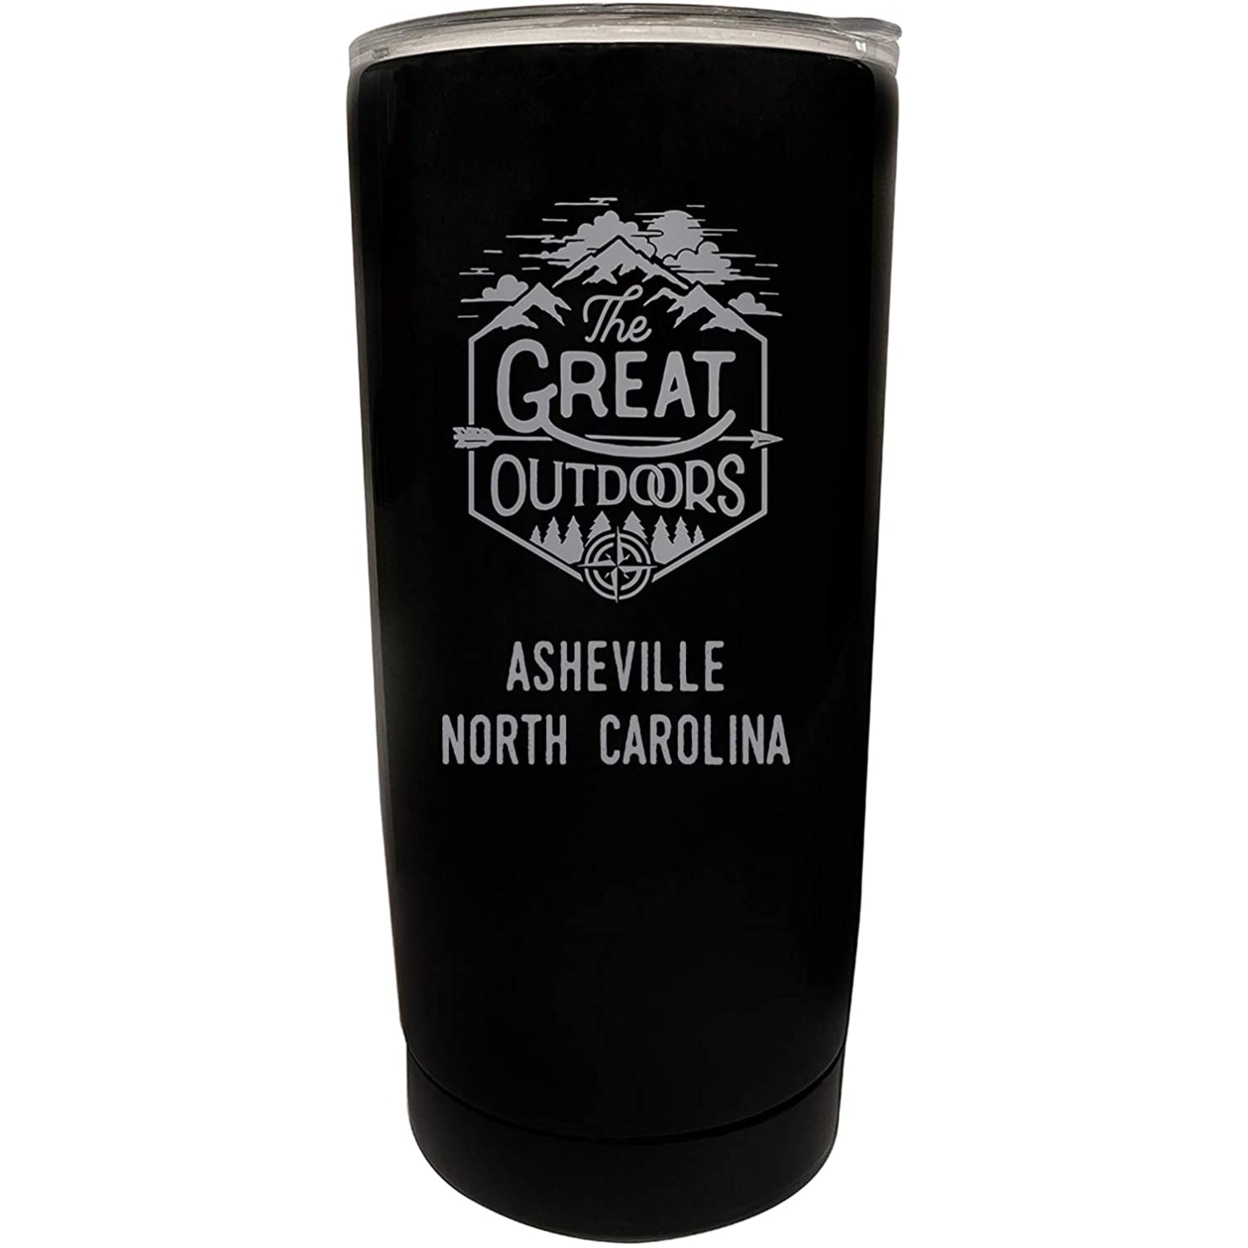 Asheville North Carolina Etched 16 Oz Stainless Steel Insulated Tumbler Outdoor Adventure Design - Black